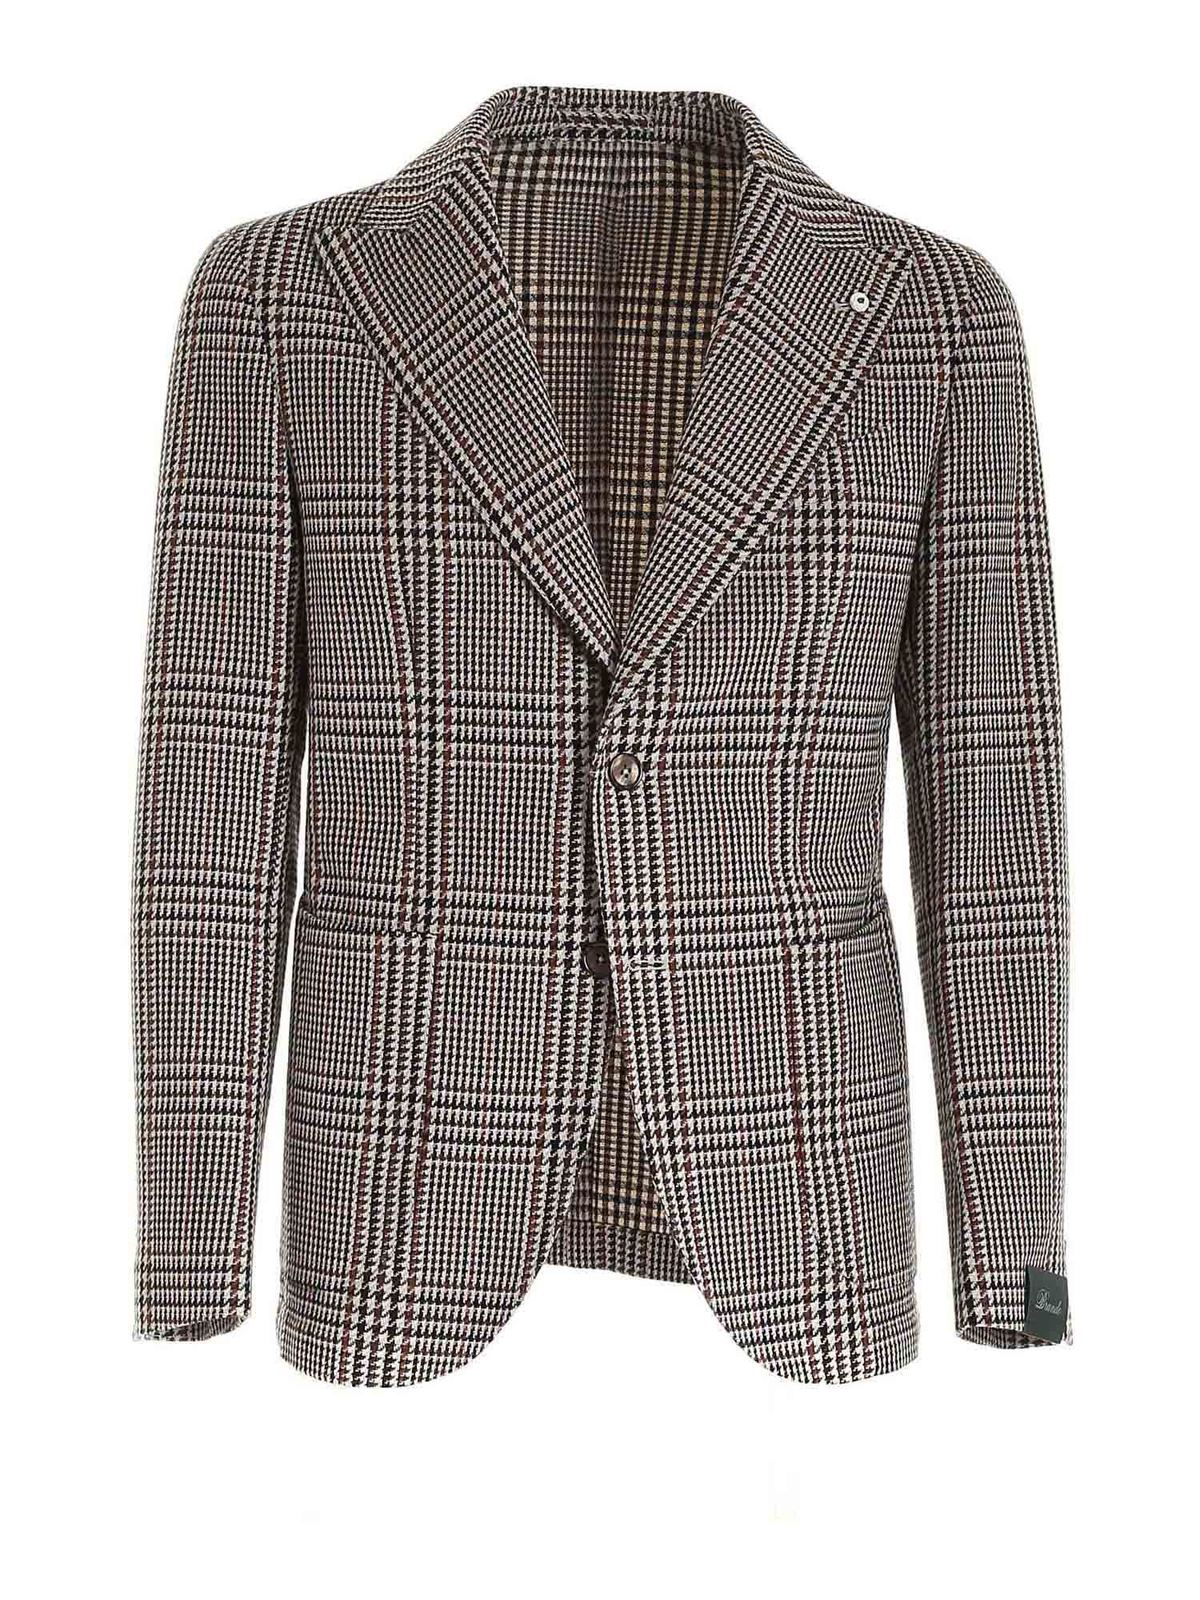 Blazers Brando - Single-breasted jacket in brown check - 2853152171